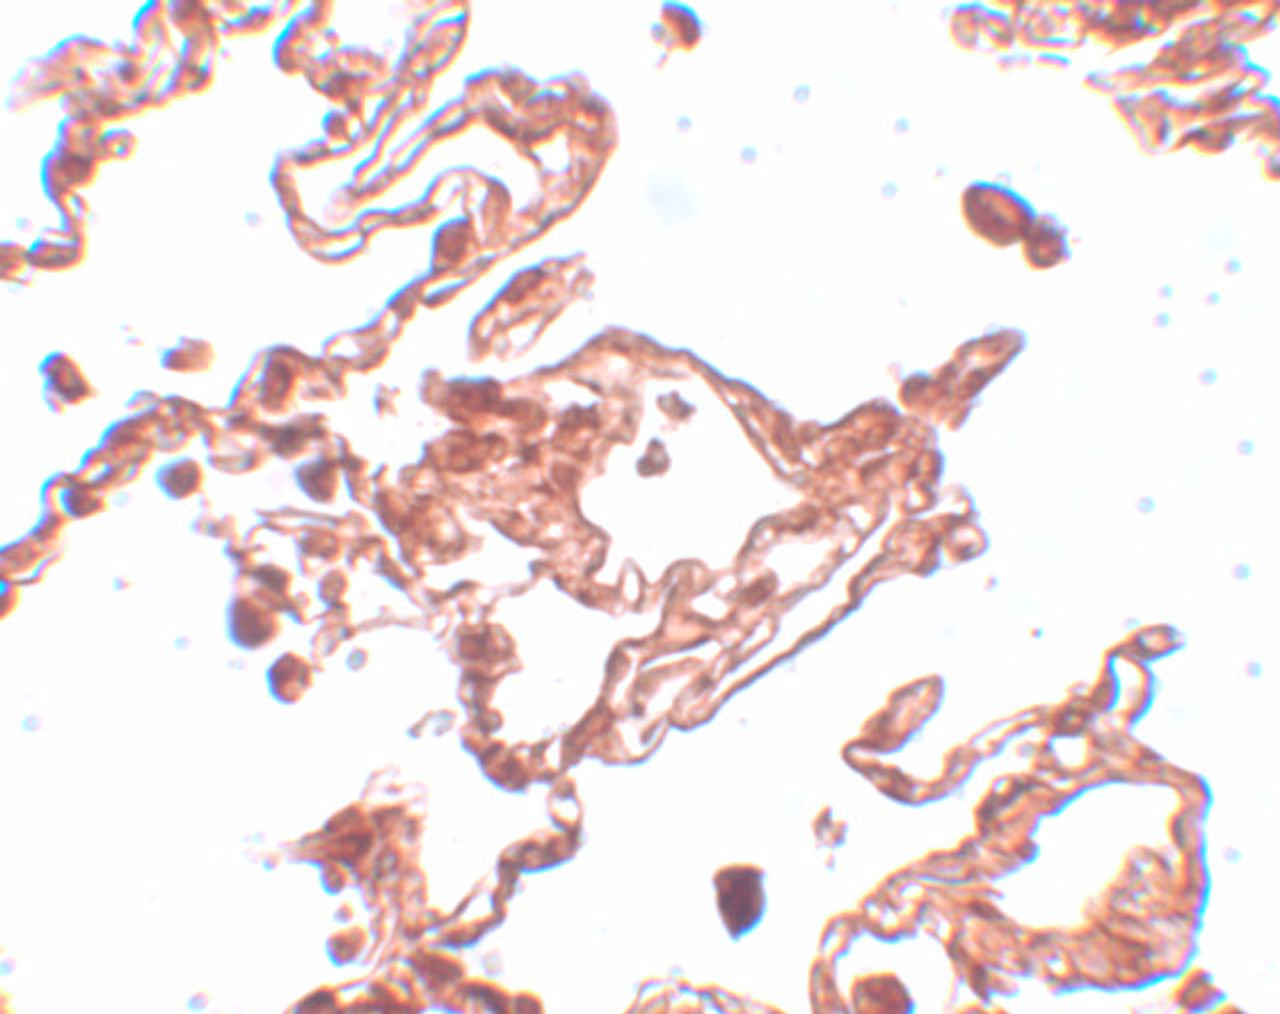 Immunohistochemistry of CCDC69 in human lung tissue with CCDC69 antibody at 5 ug/mL.